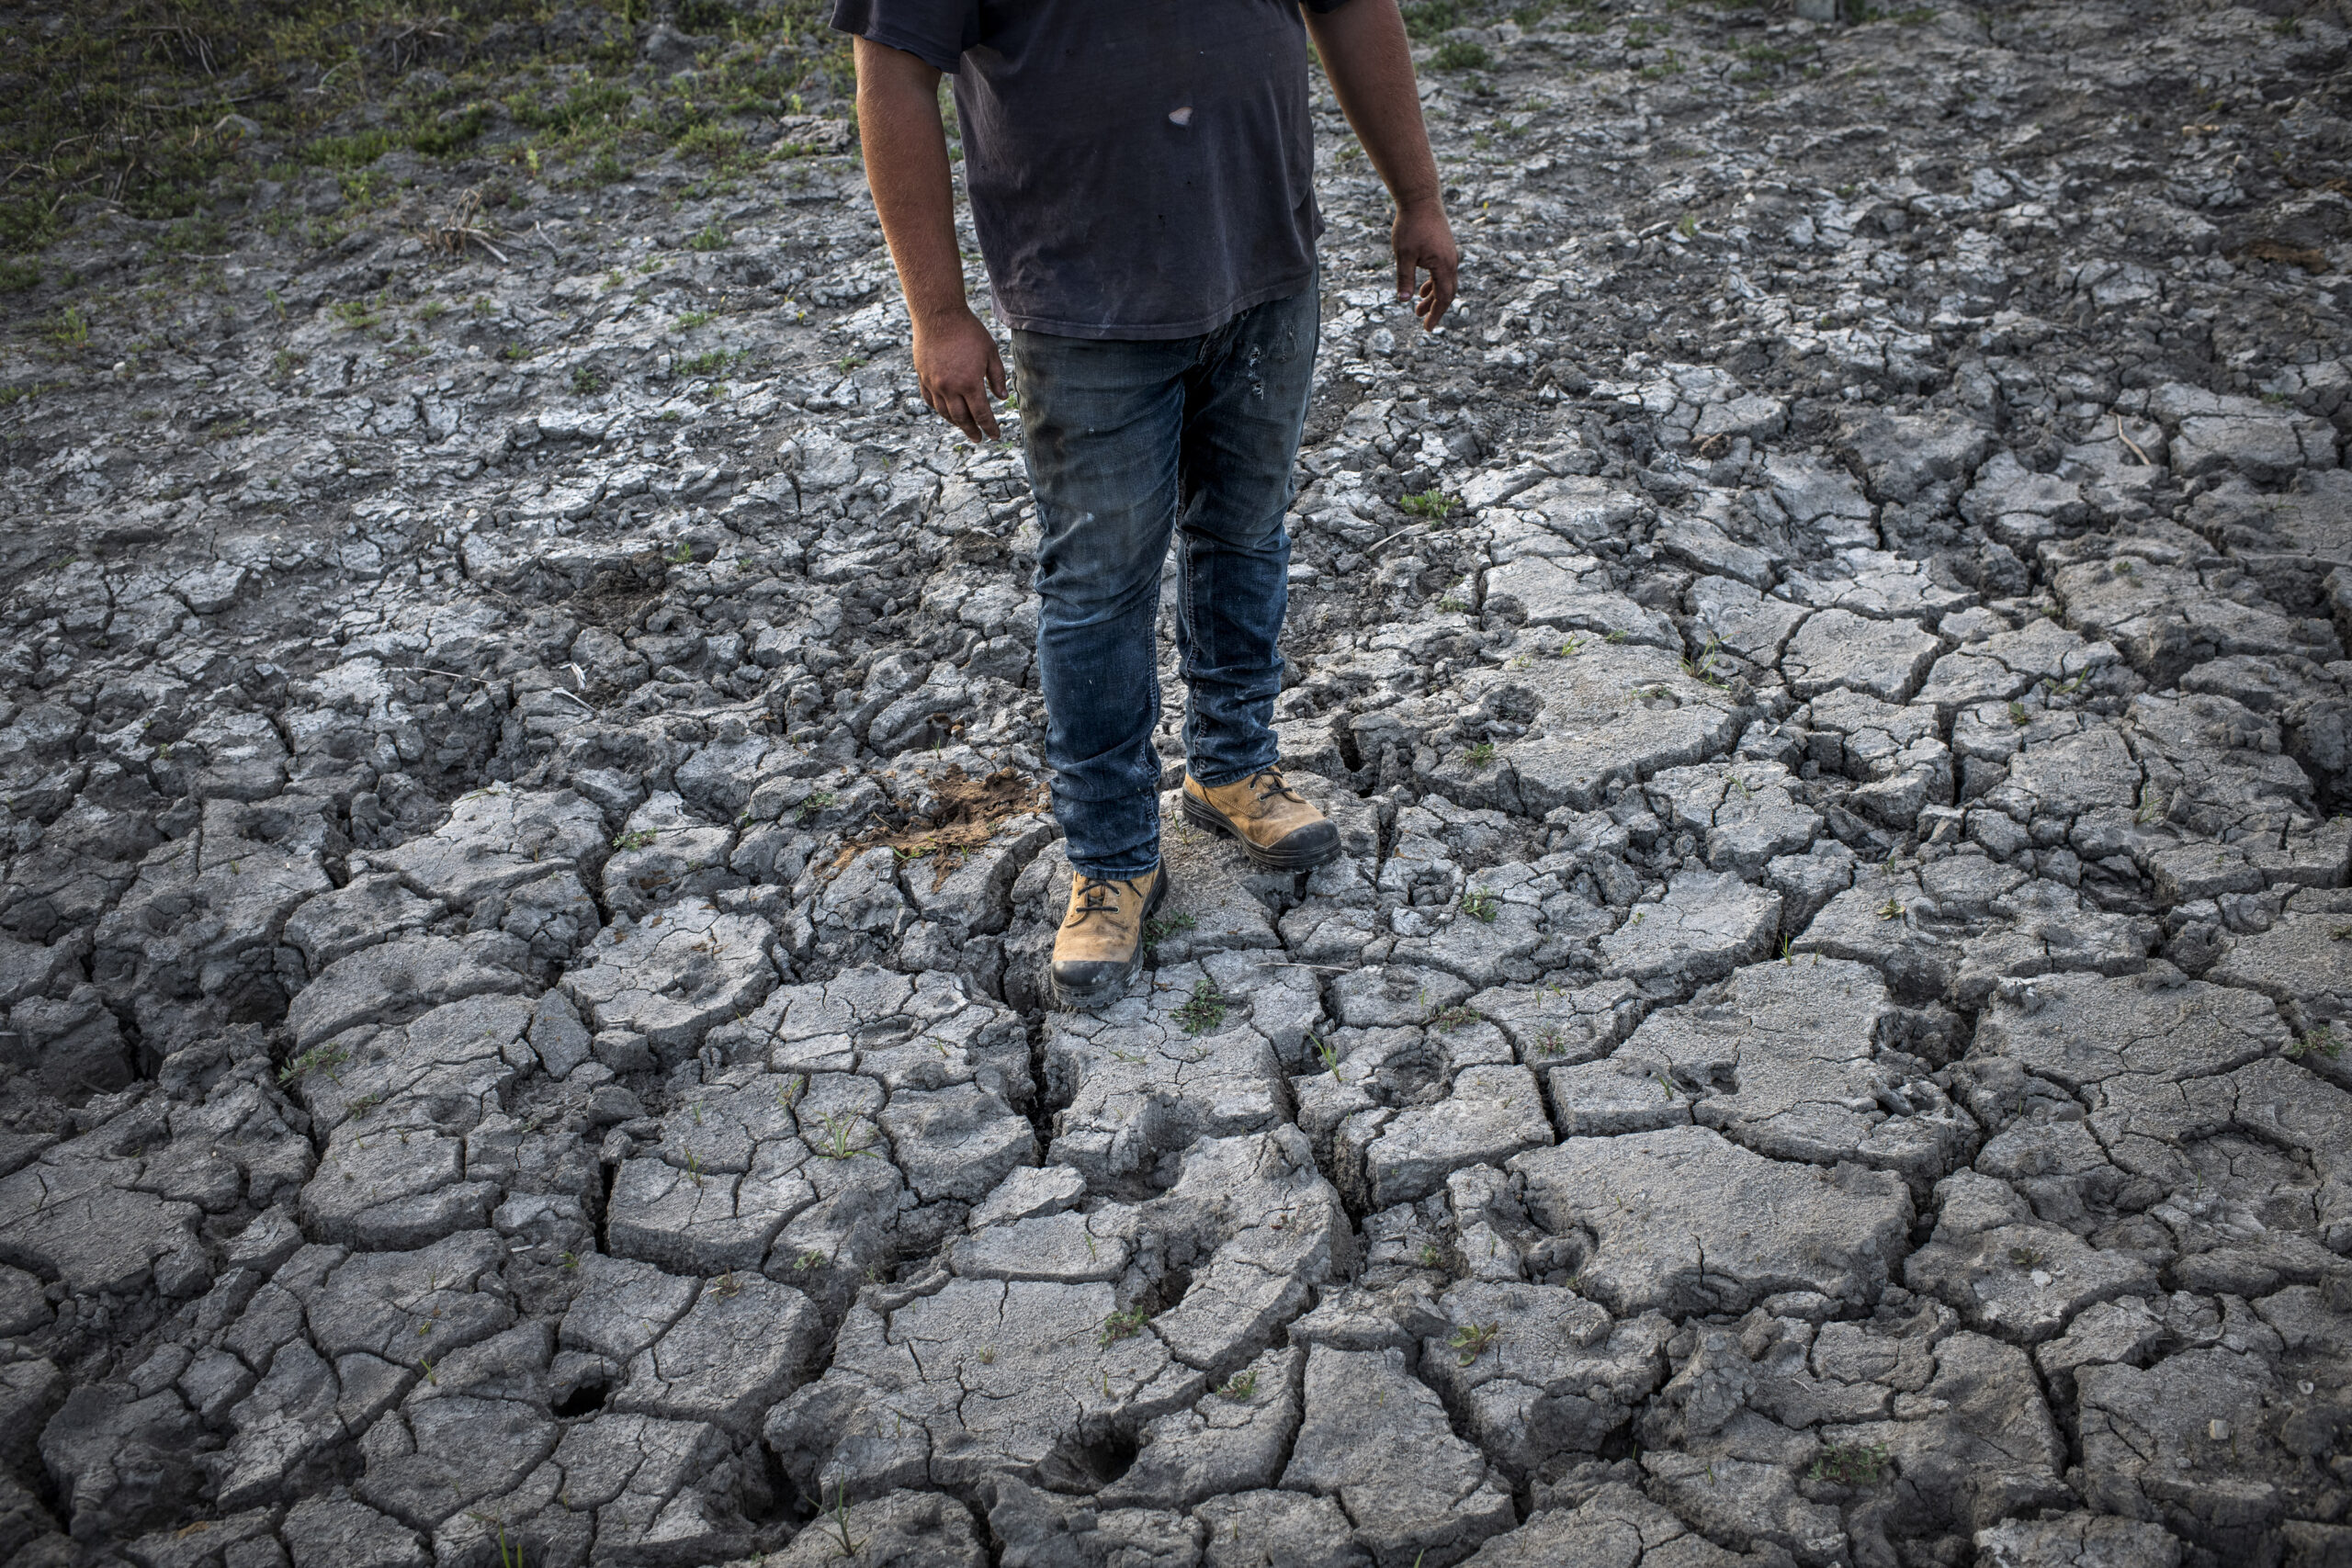 A man stands on dry, cracked mud in drought-ridden southern Manitoba in summer 2021